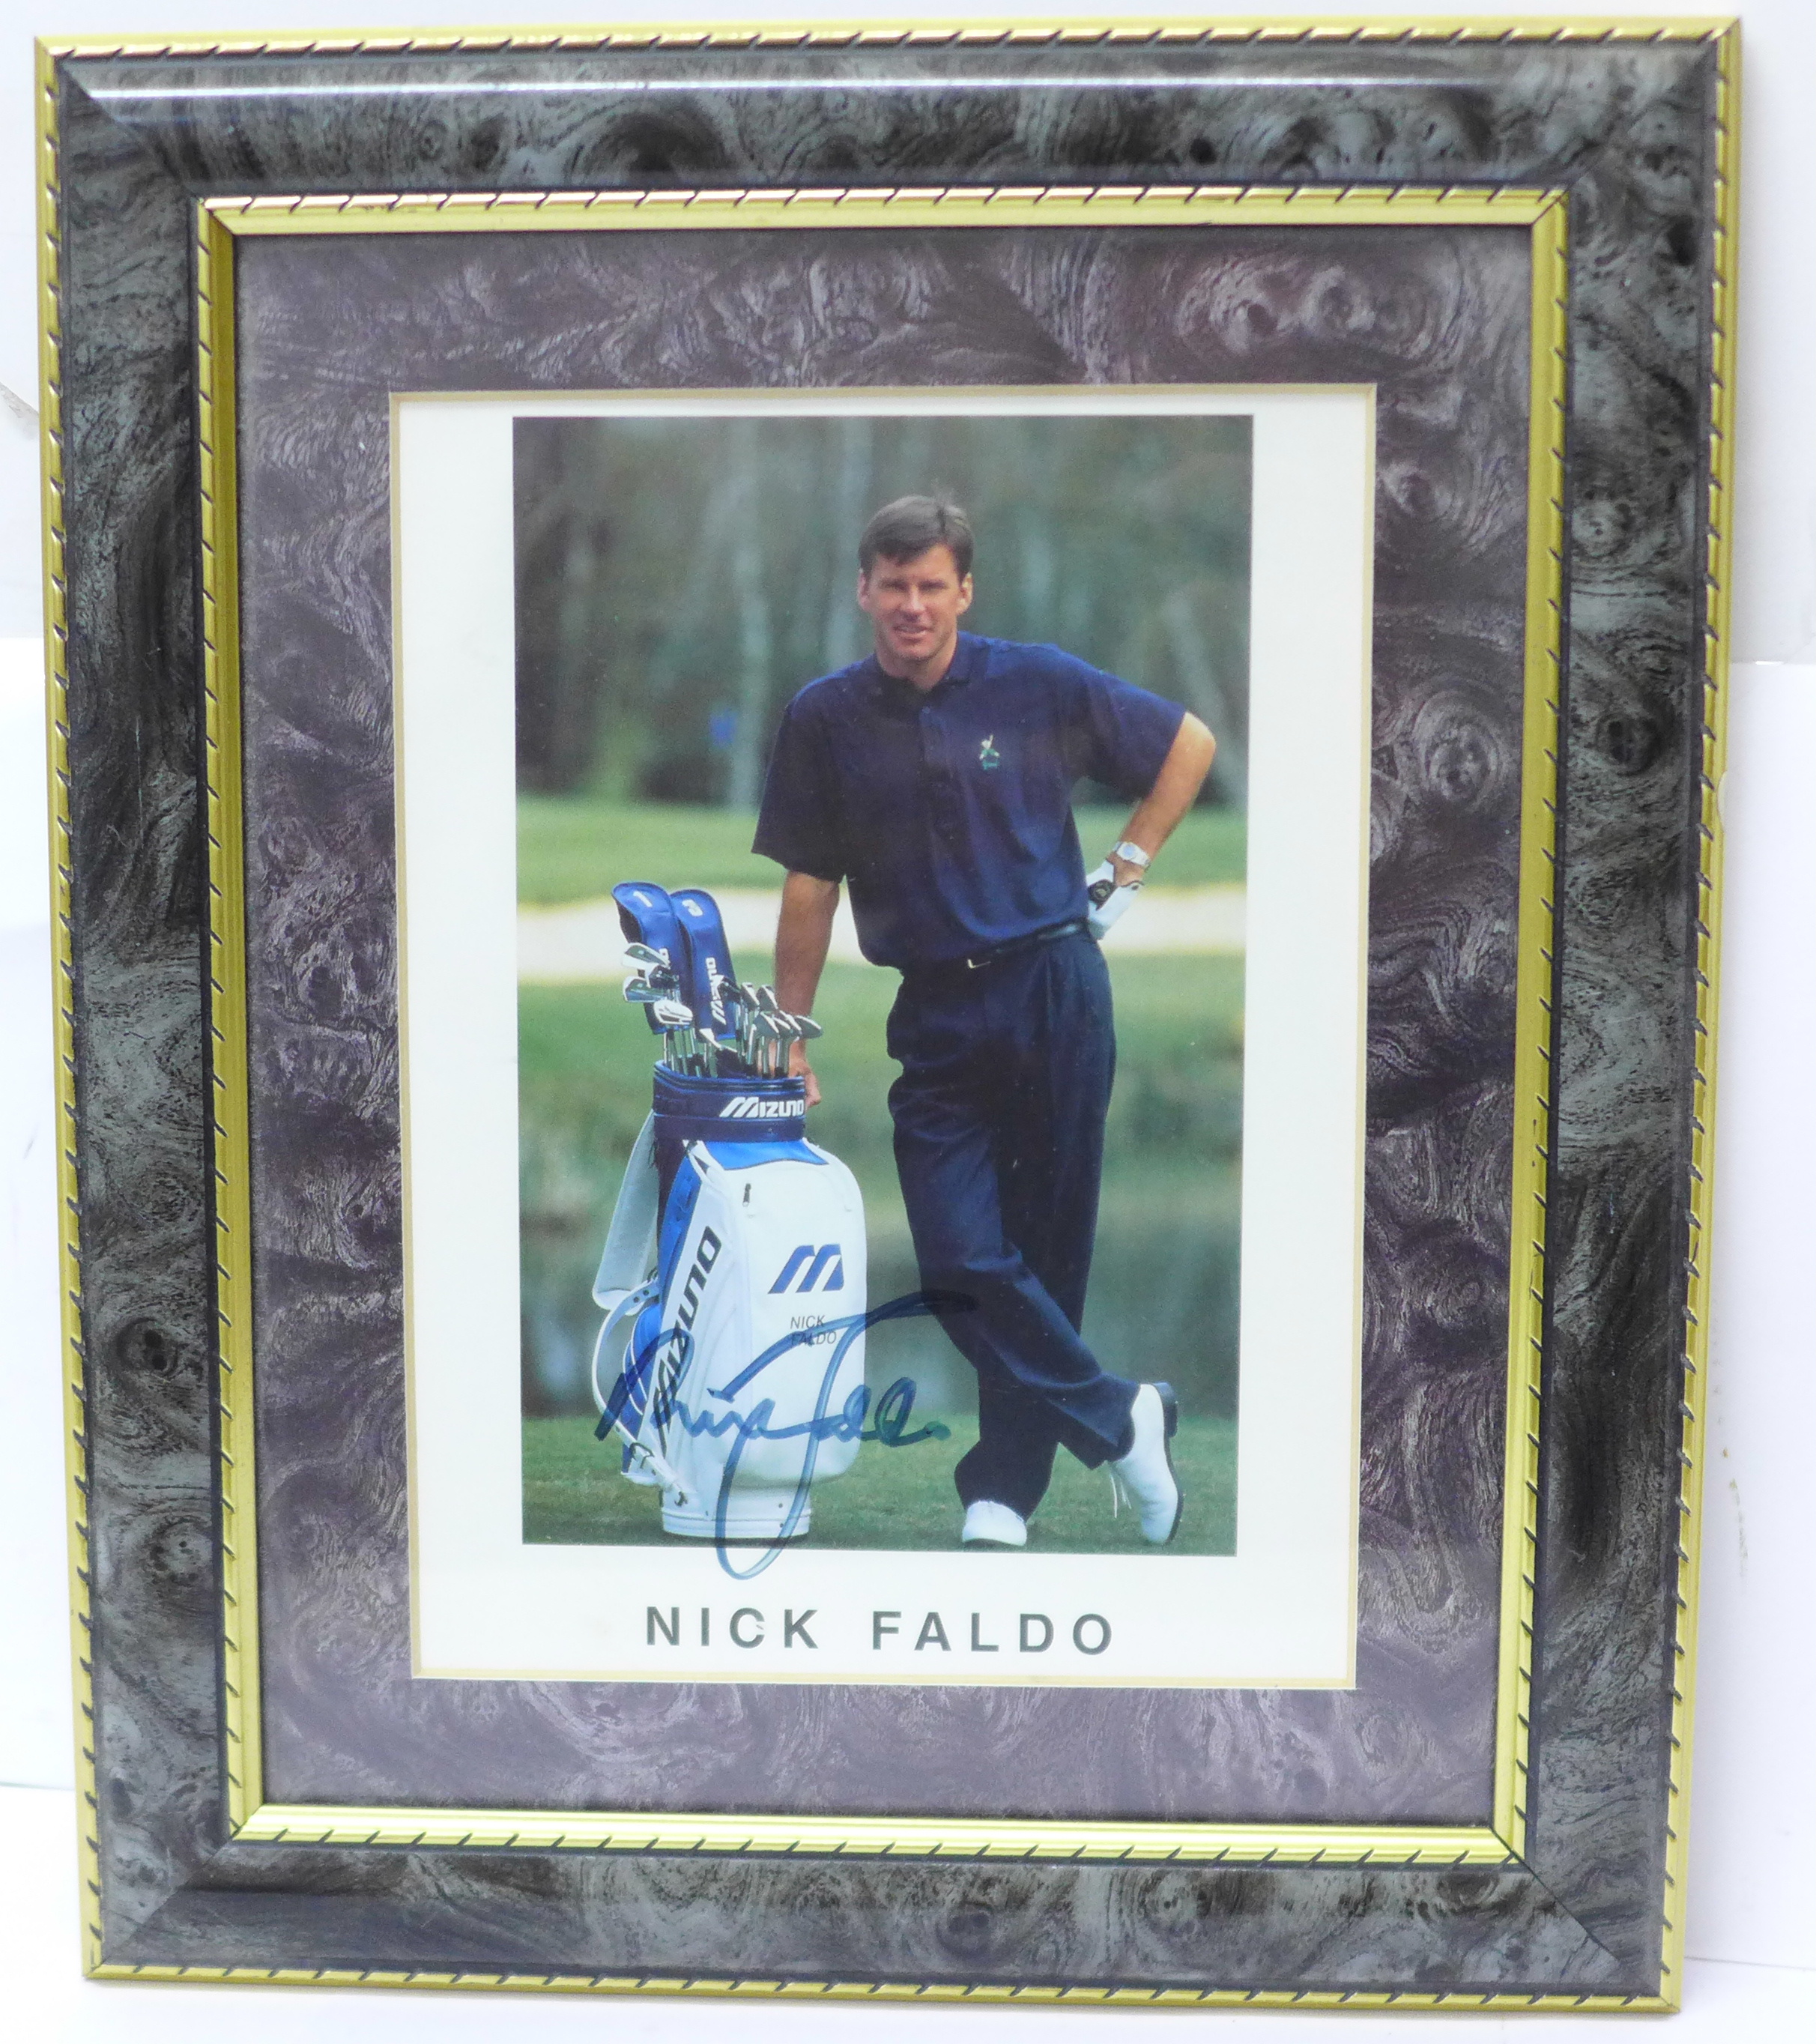 A framed signed picture of Nick Faldo